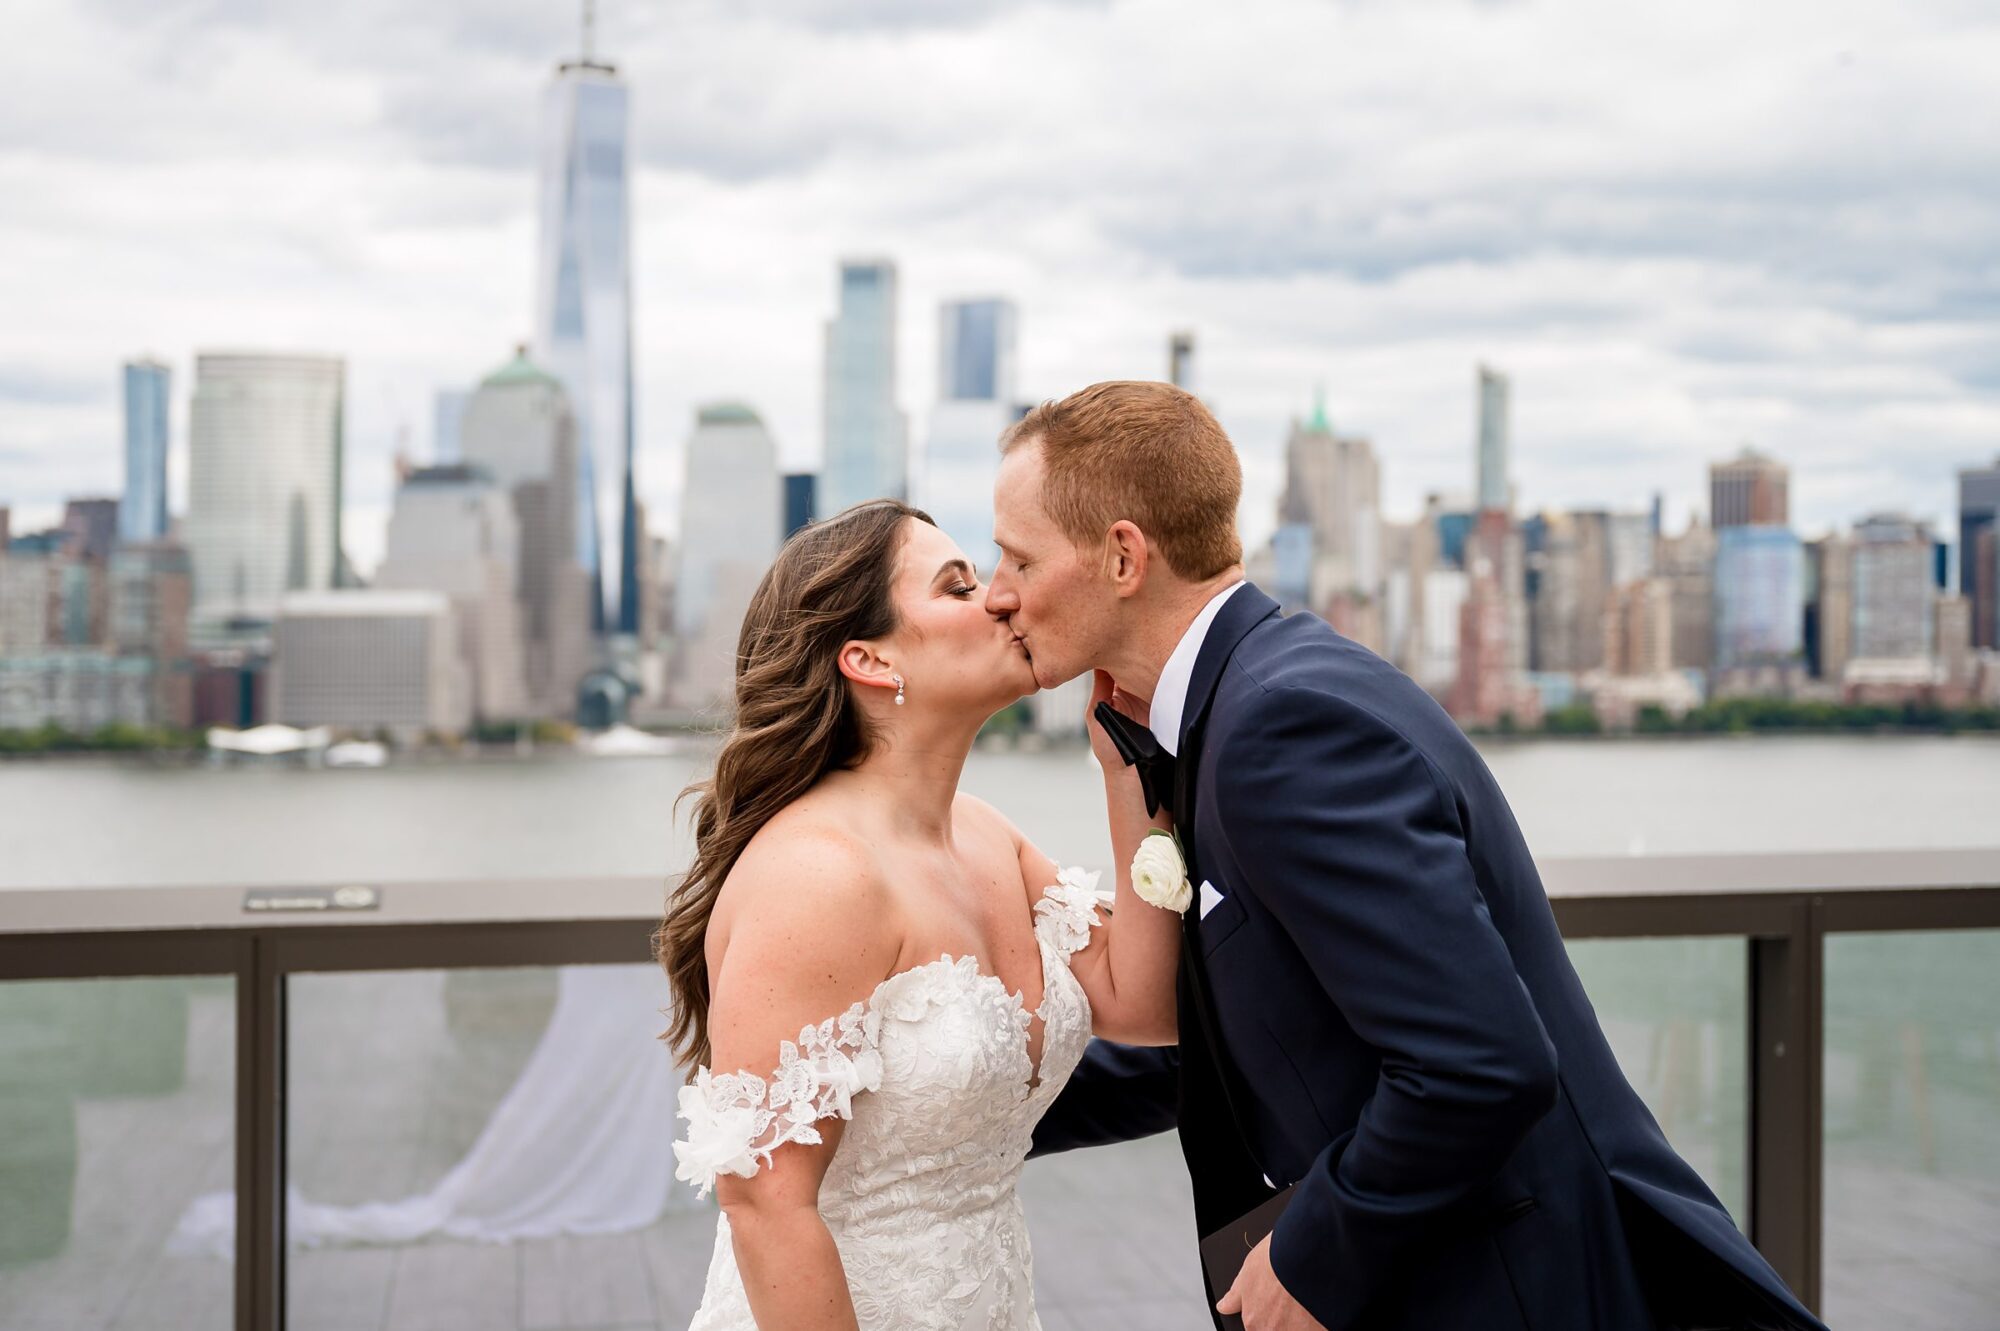 A bride and groom kiss in front of the manhattan skyline.